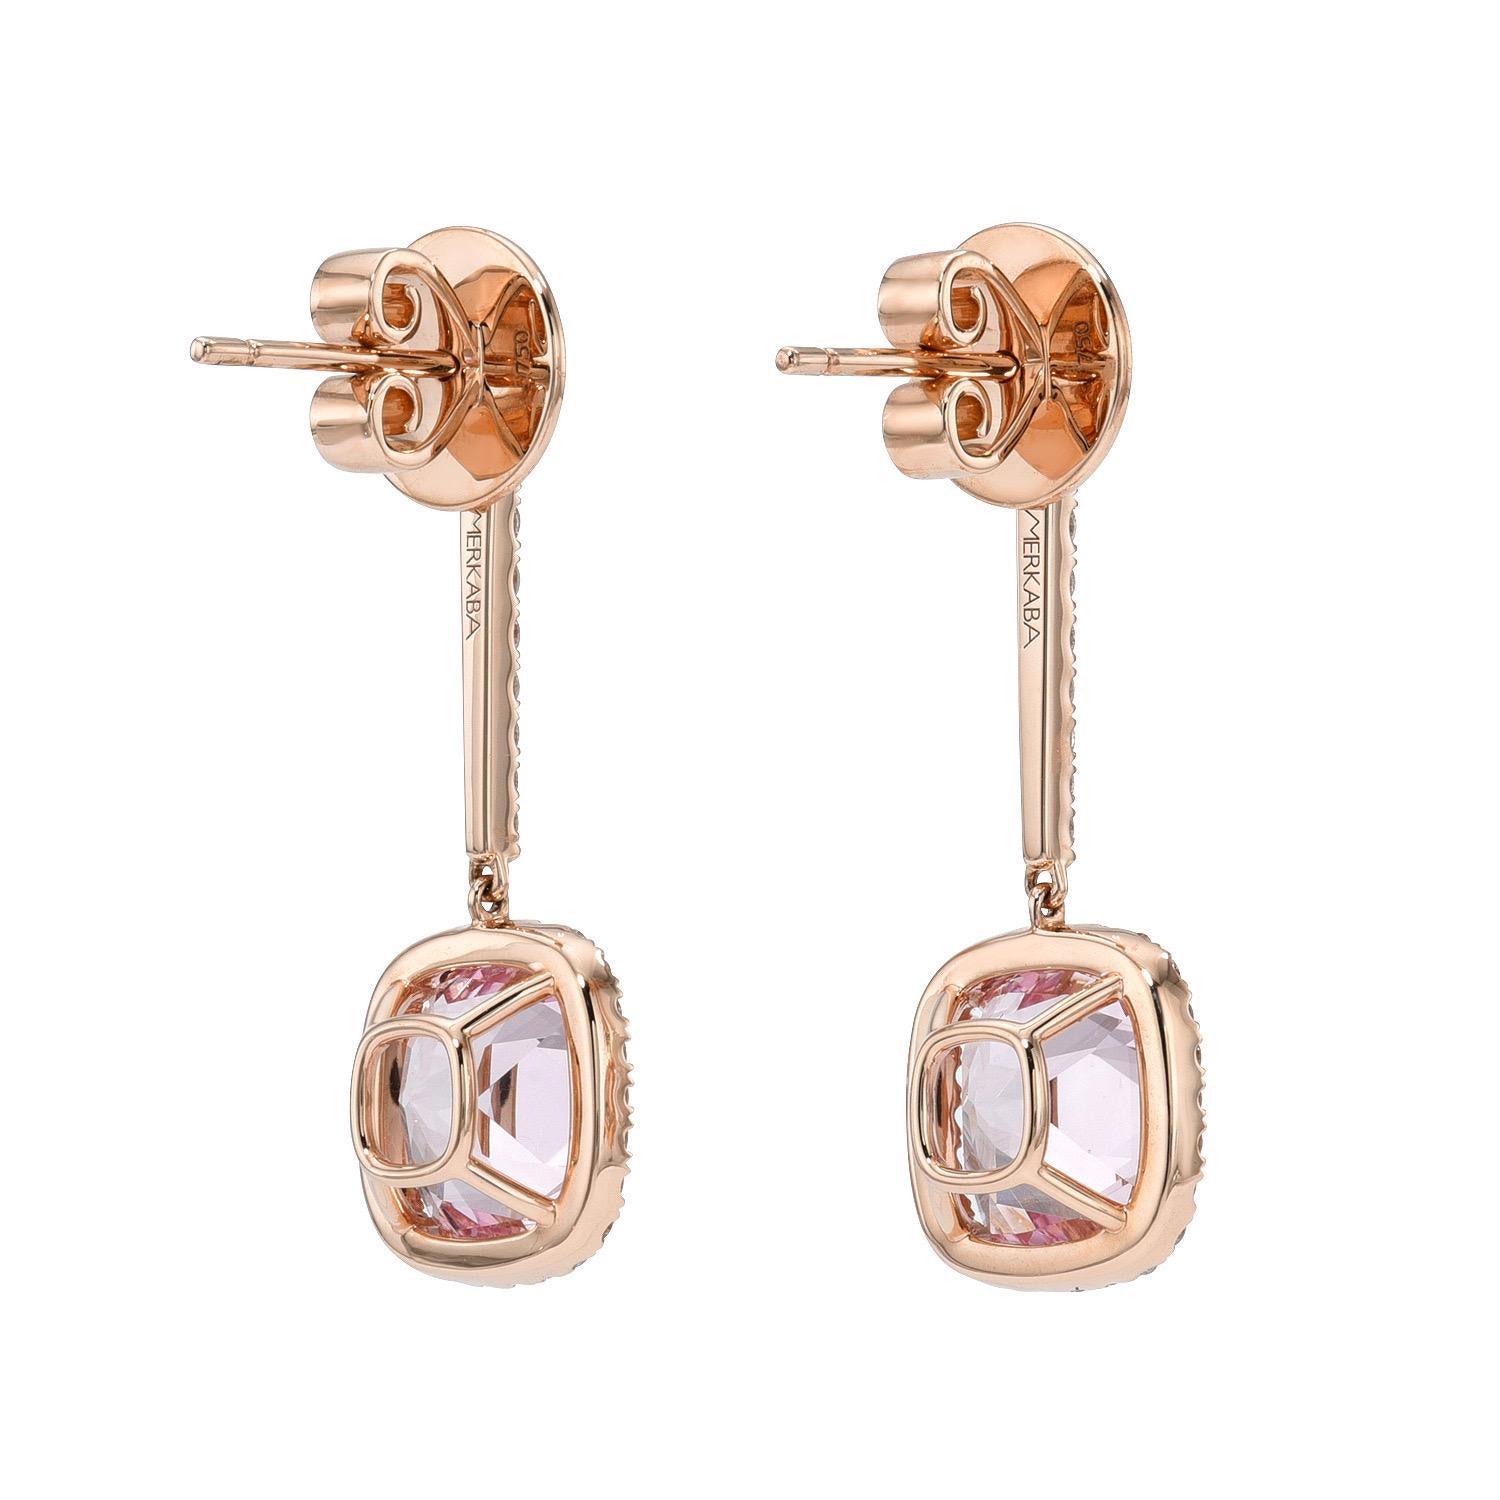 Very bright pair of 5.02 carat Morganite cushion, 18K rose gold earrings, decorated with a total of 0.73 carat round brilliant diamonds.
Returns are accepted and paid by us within 7 days of delivery.

Please FOLLOW the MERKABA storefront to be the